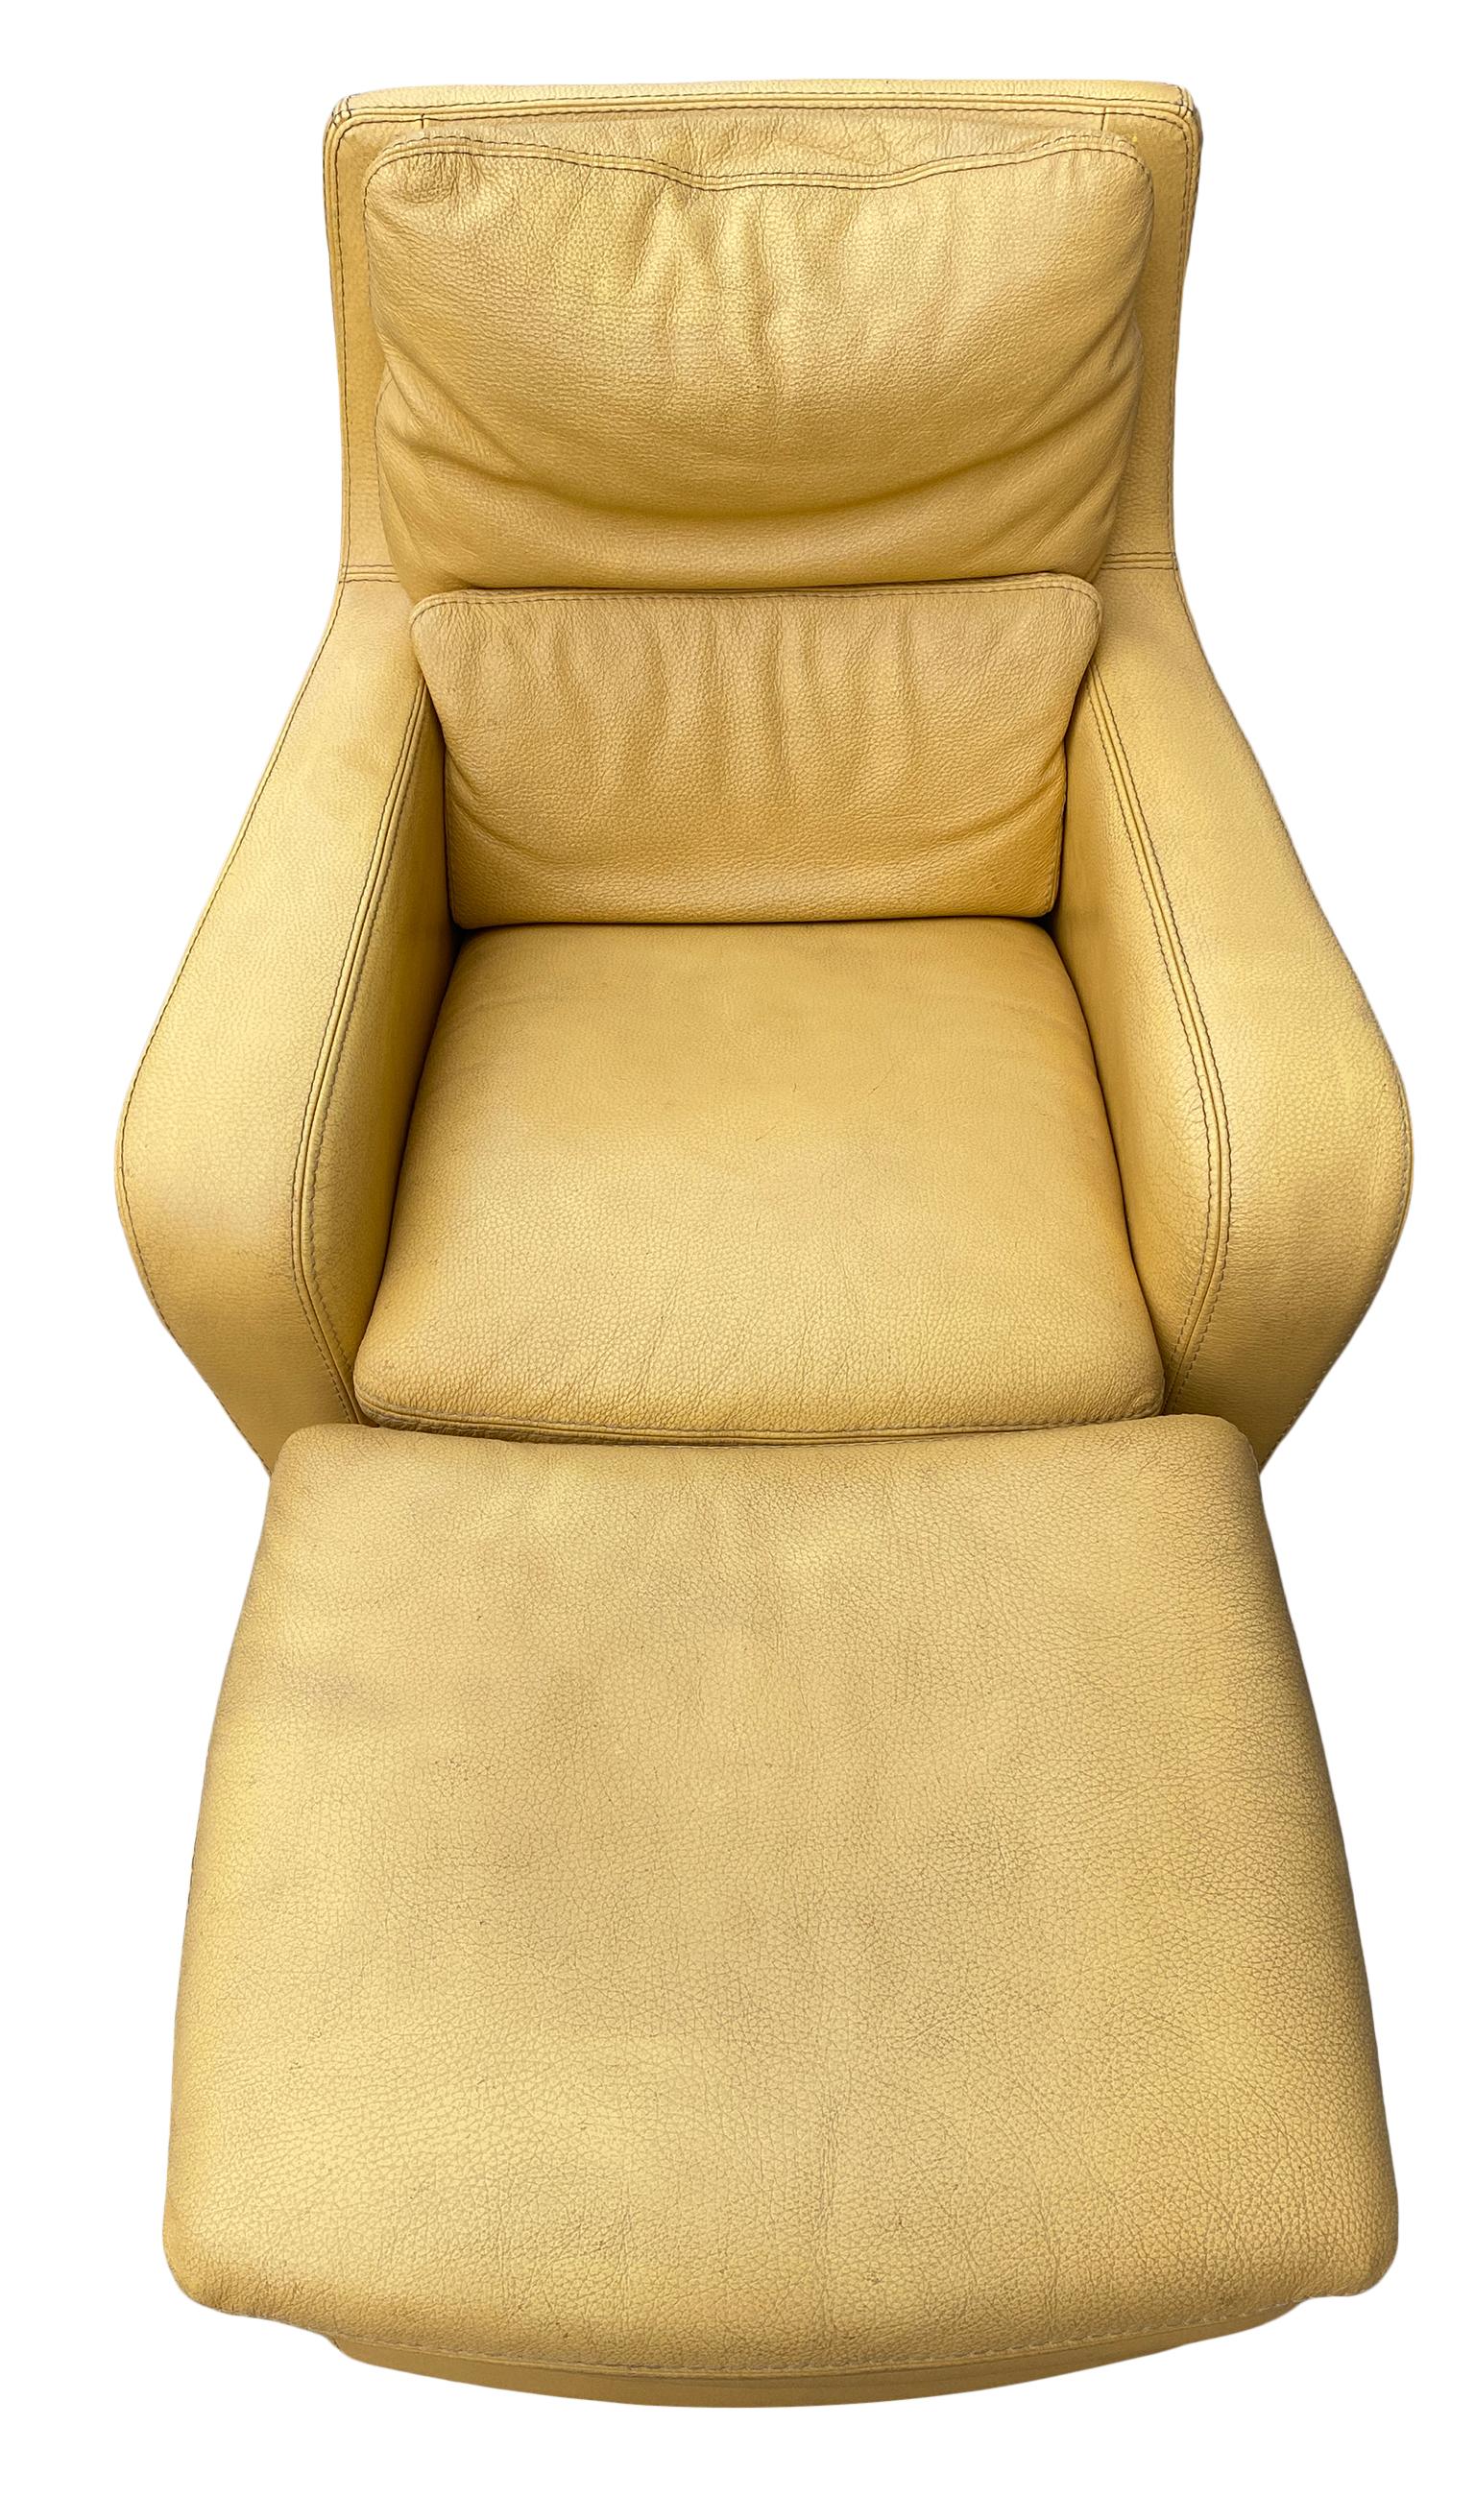 yellow leather chair with ottoman